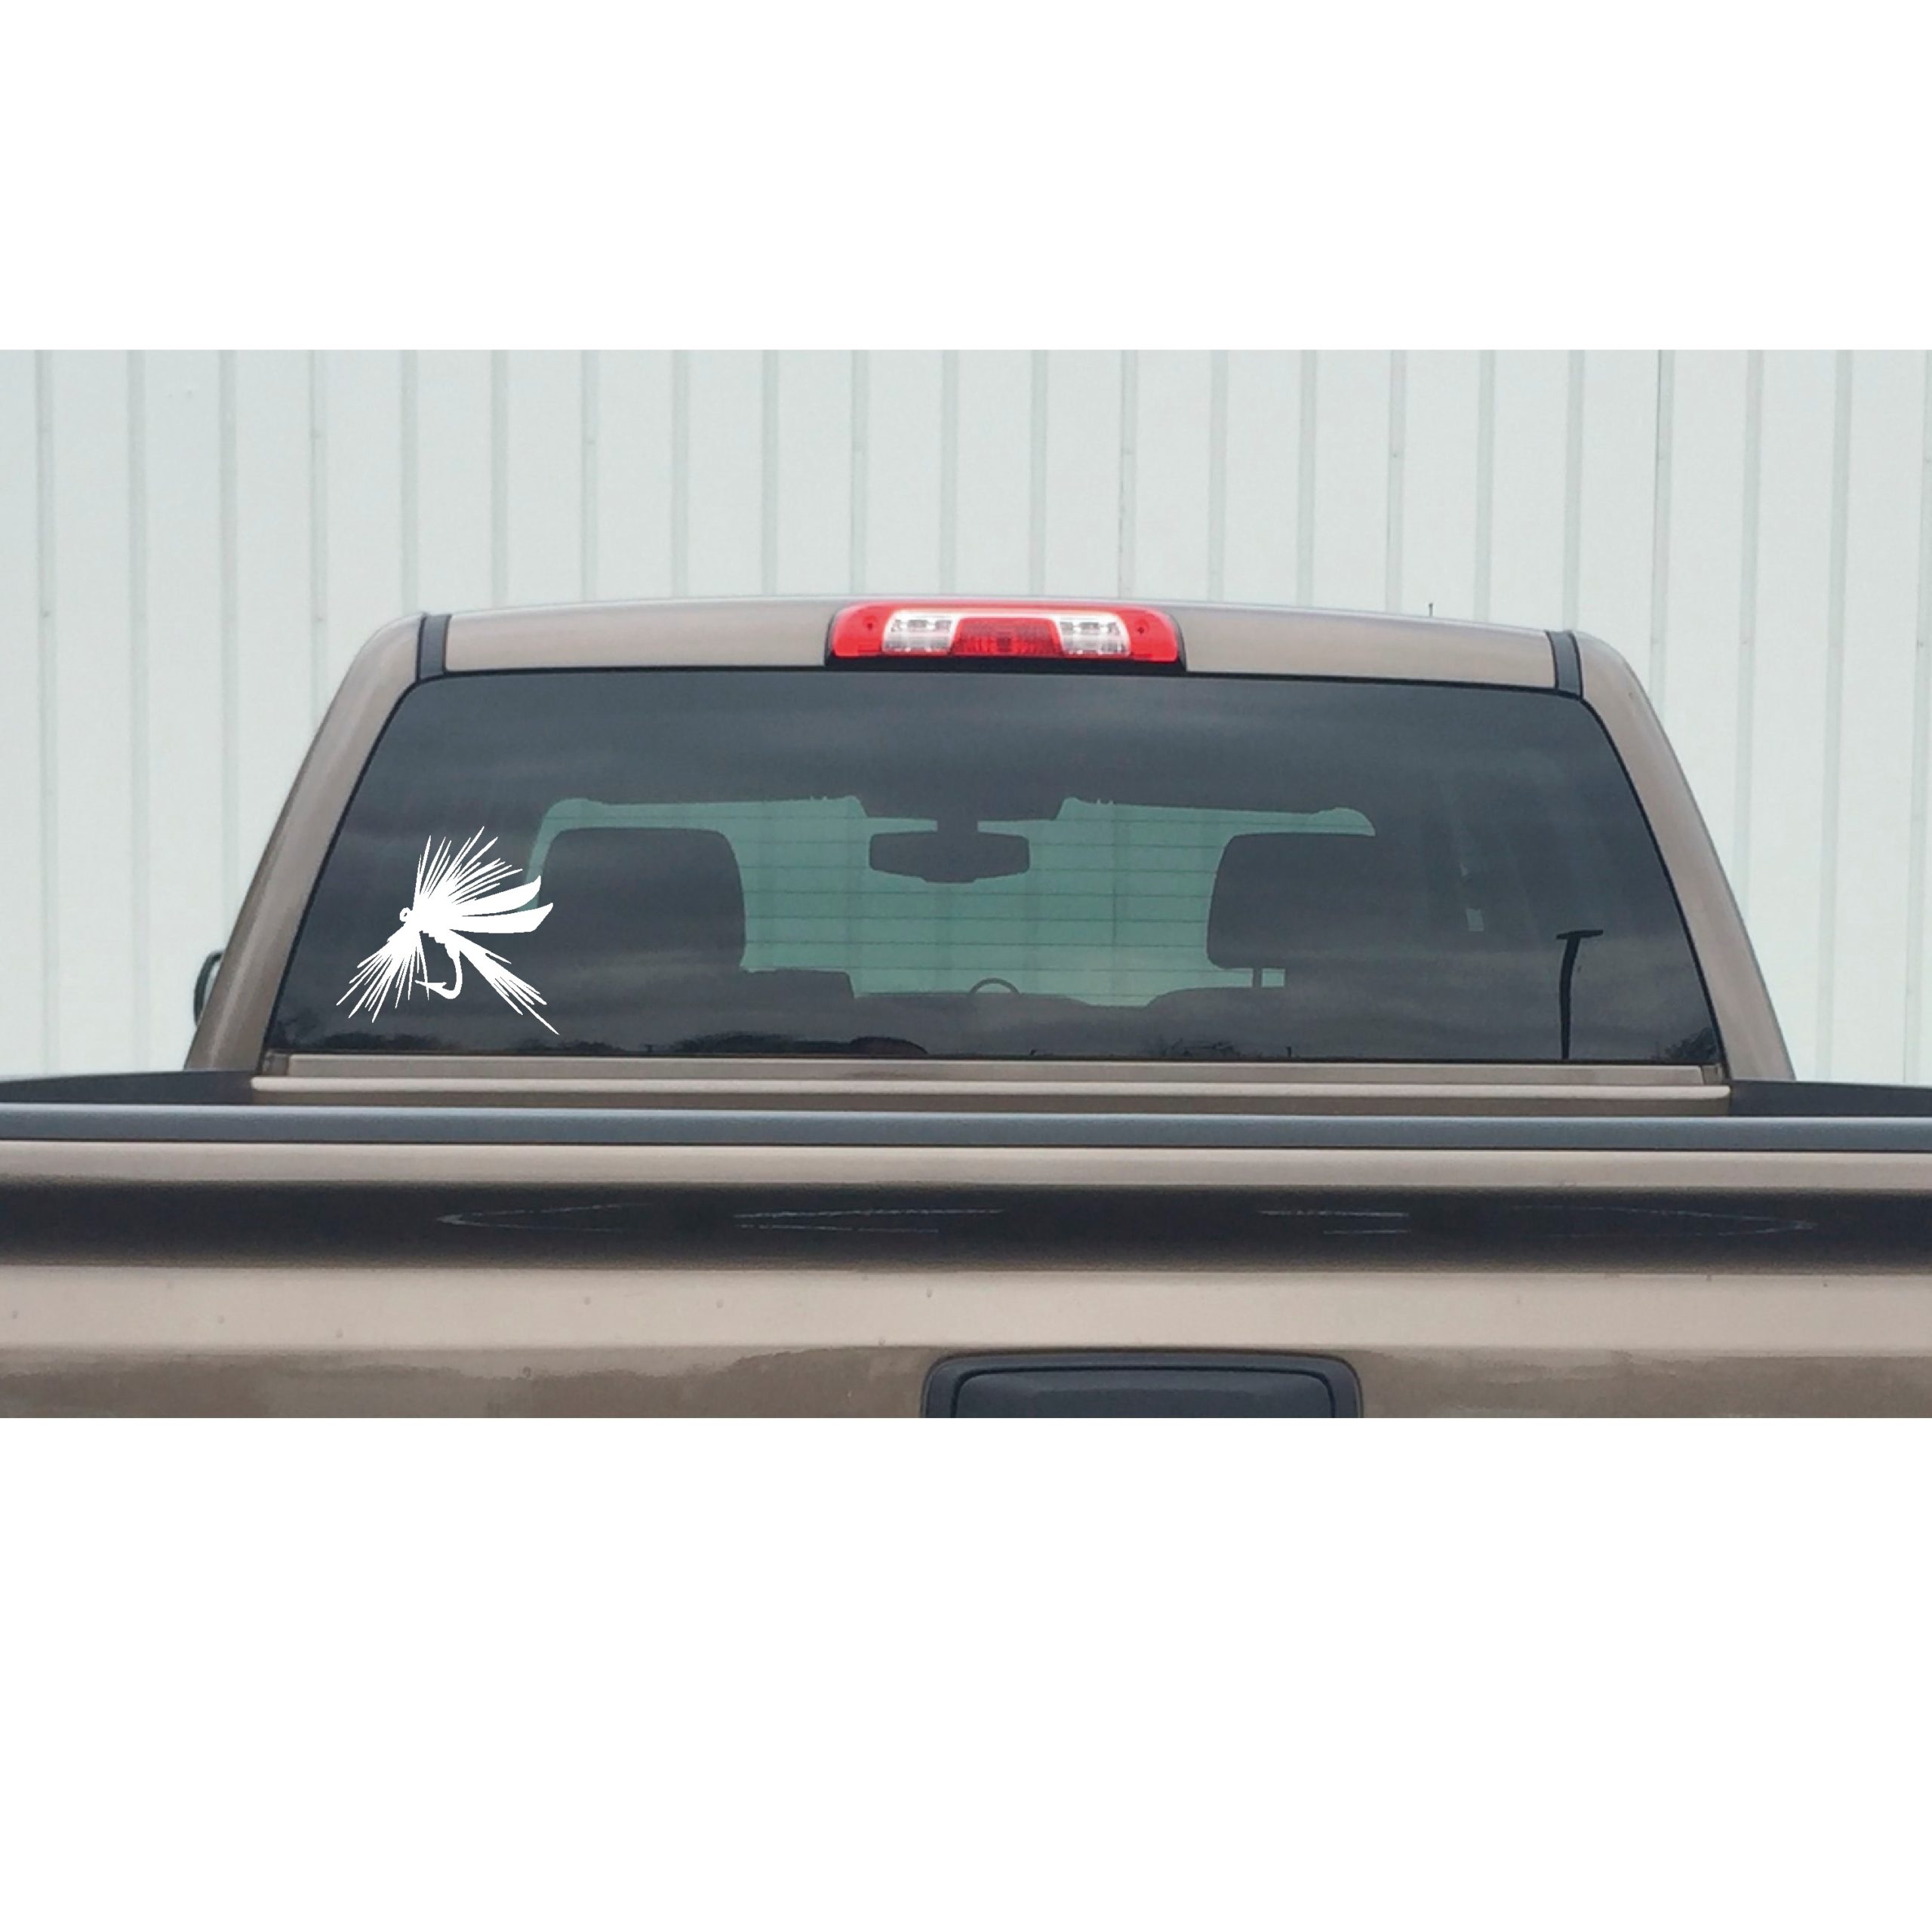 Right Now Decals Fly Fishing Fisherman Trout Fish - Cars Trucks